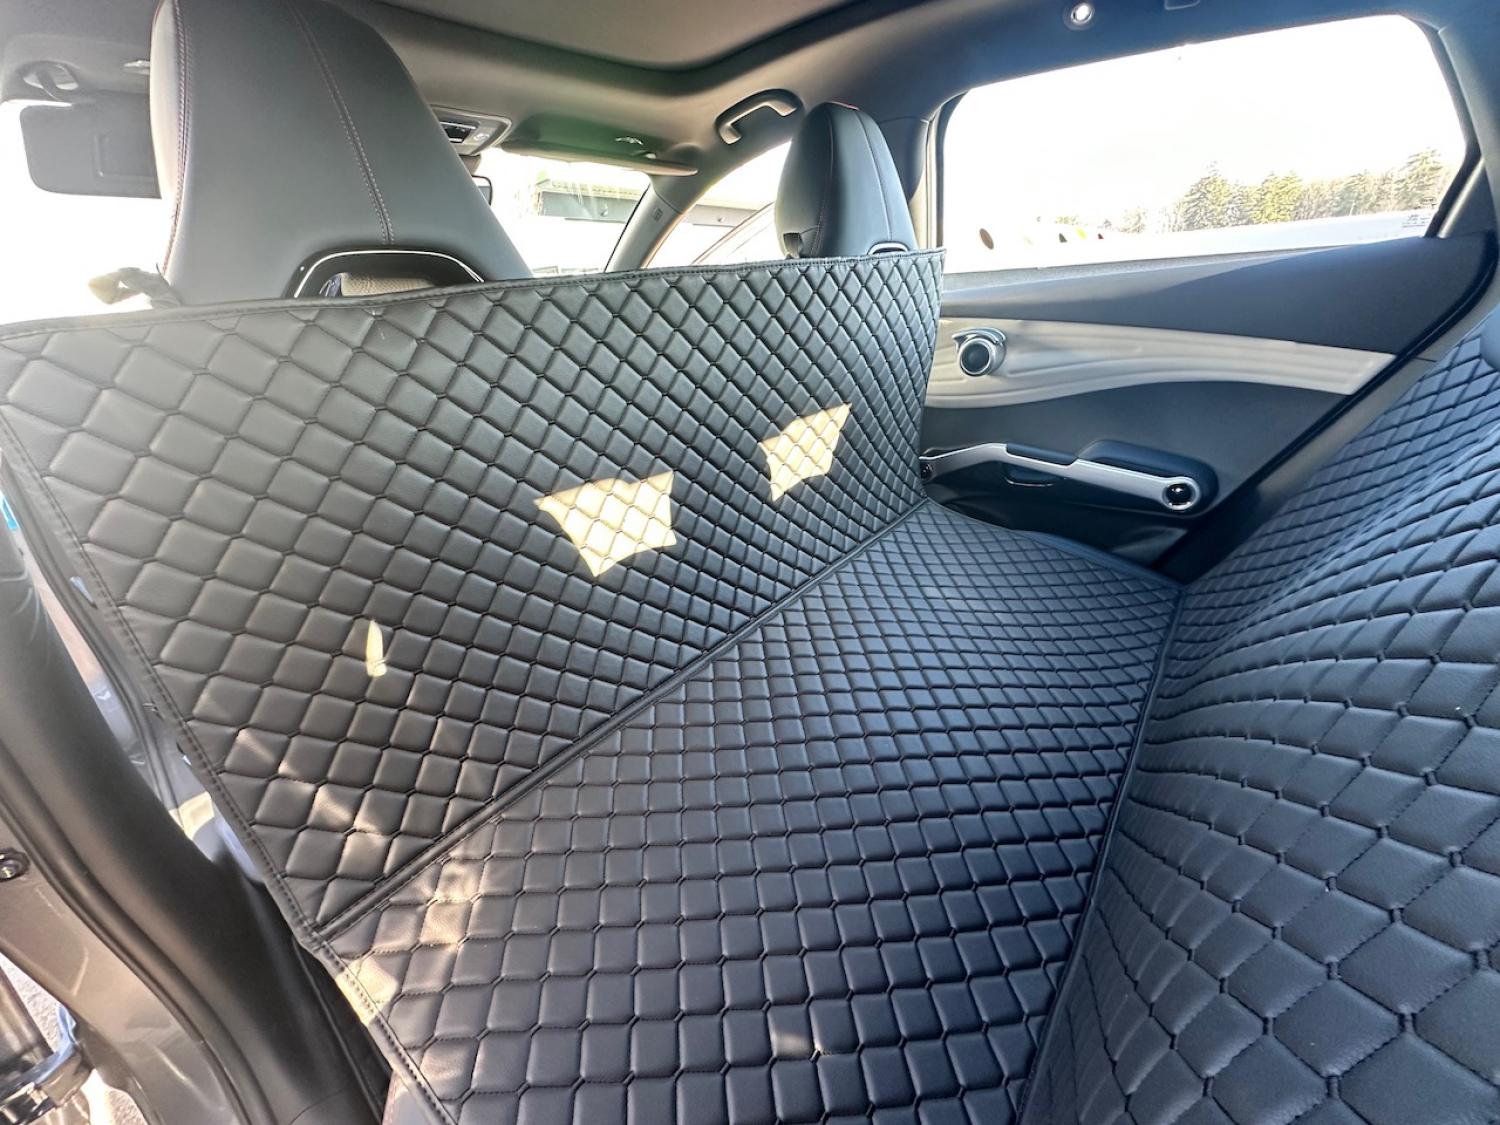 CARSTYLER® Back Seat Cover Geeignet Für Audi A5 8T Sportback 2009-2016